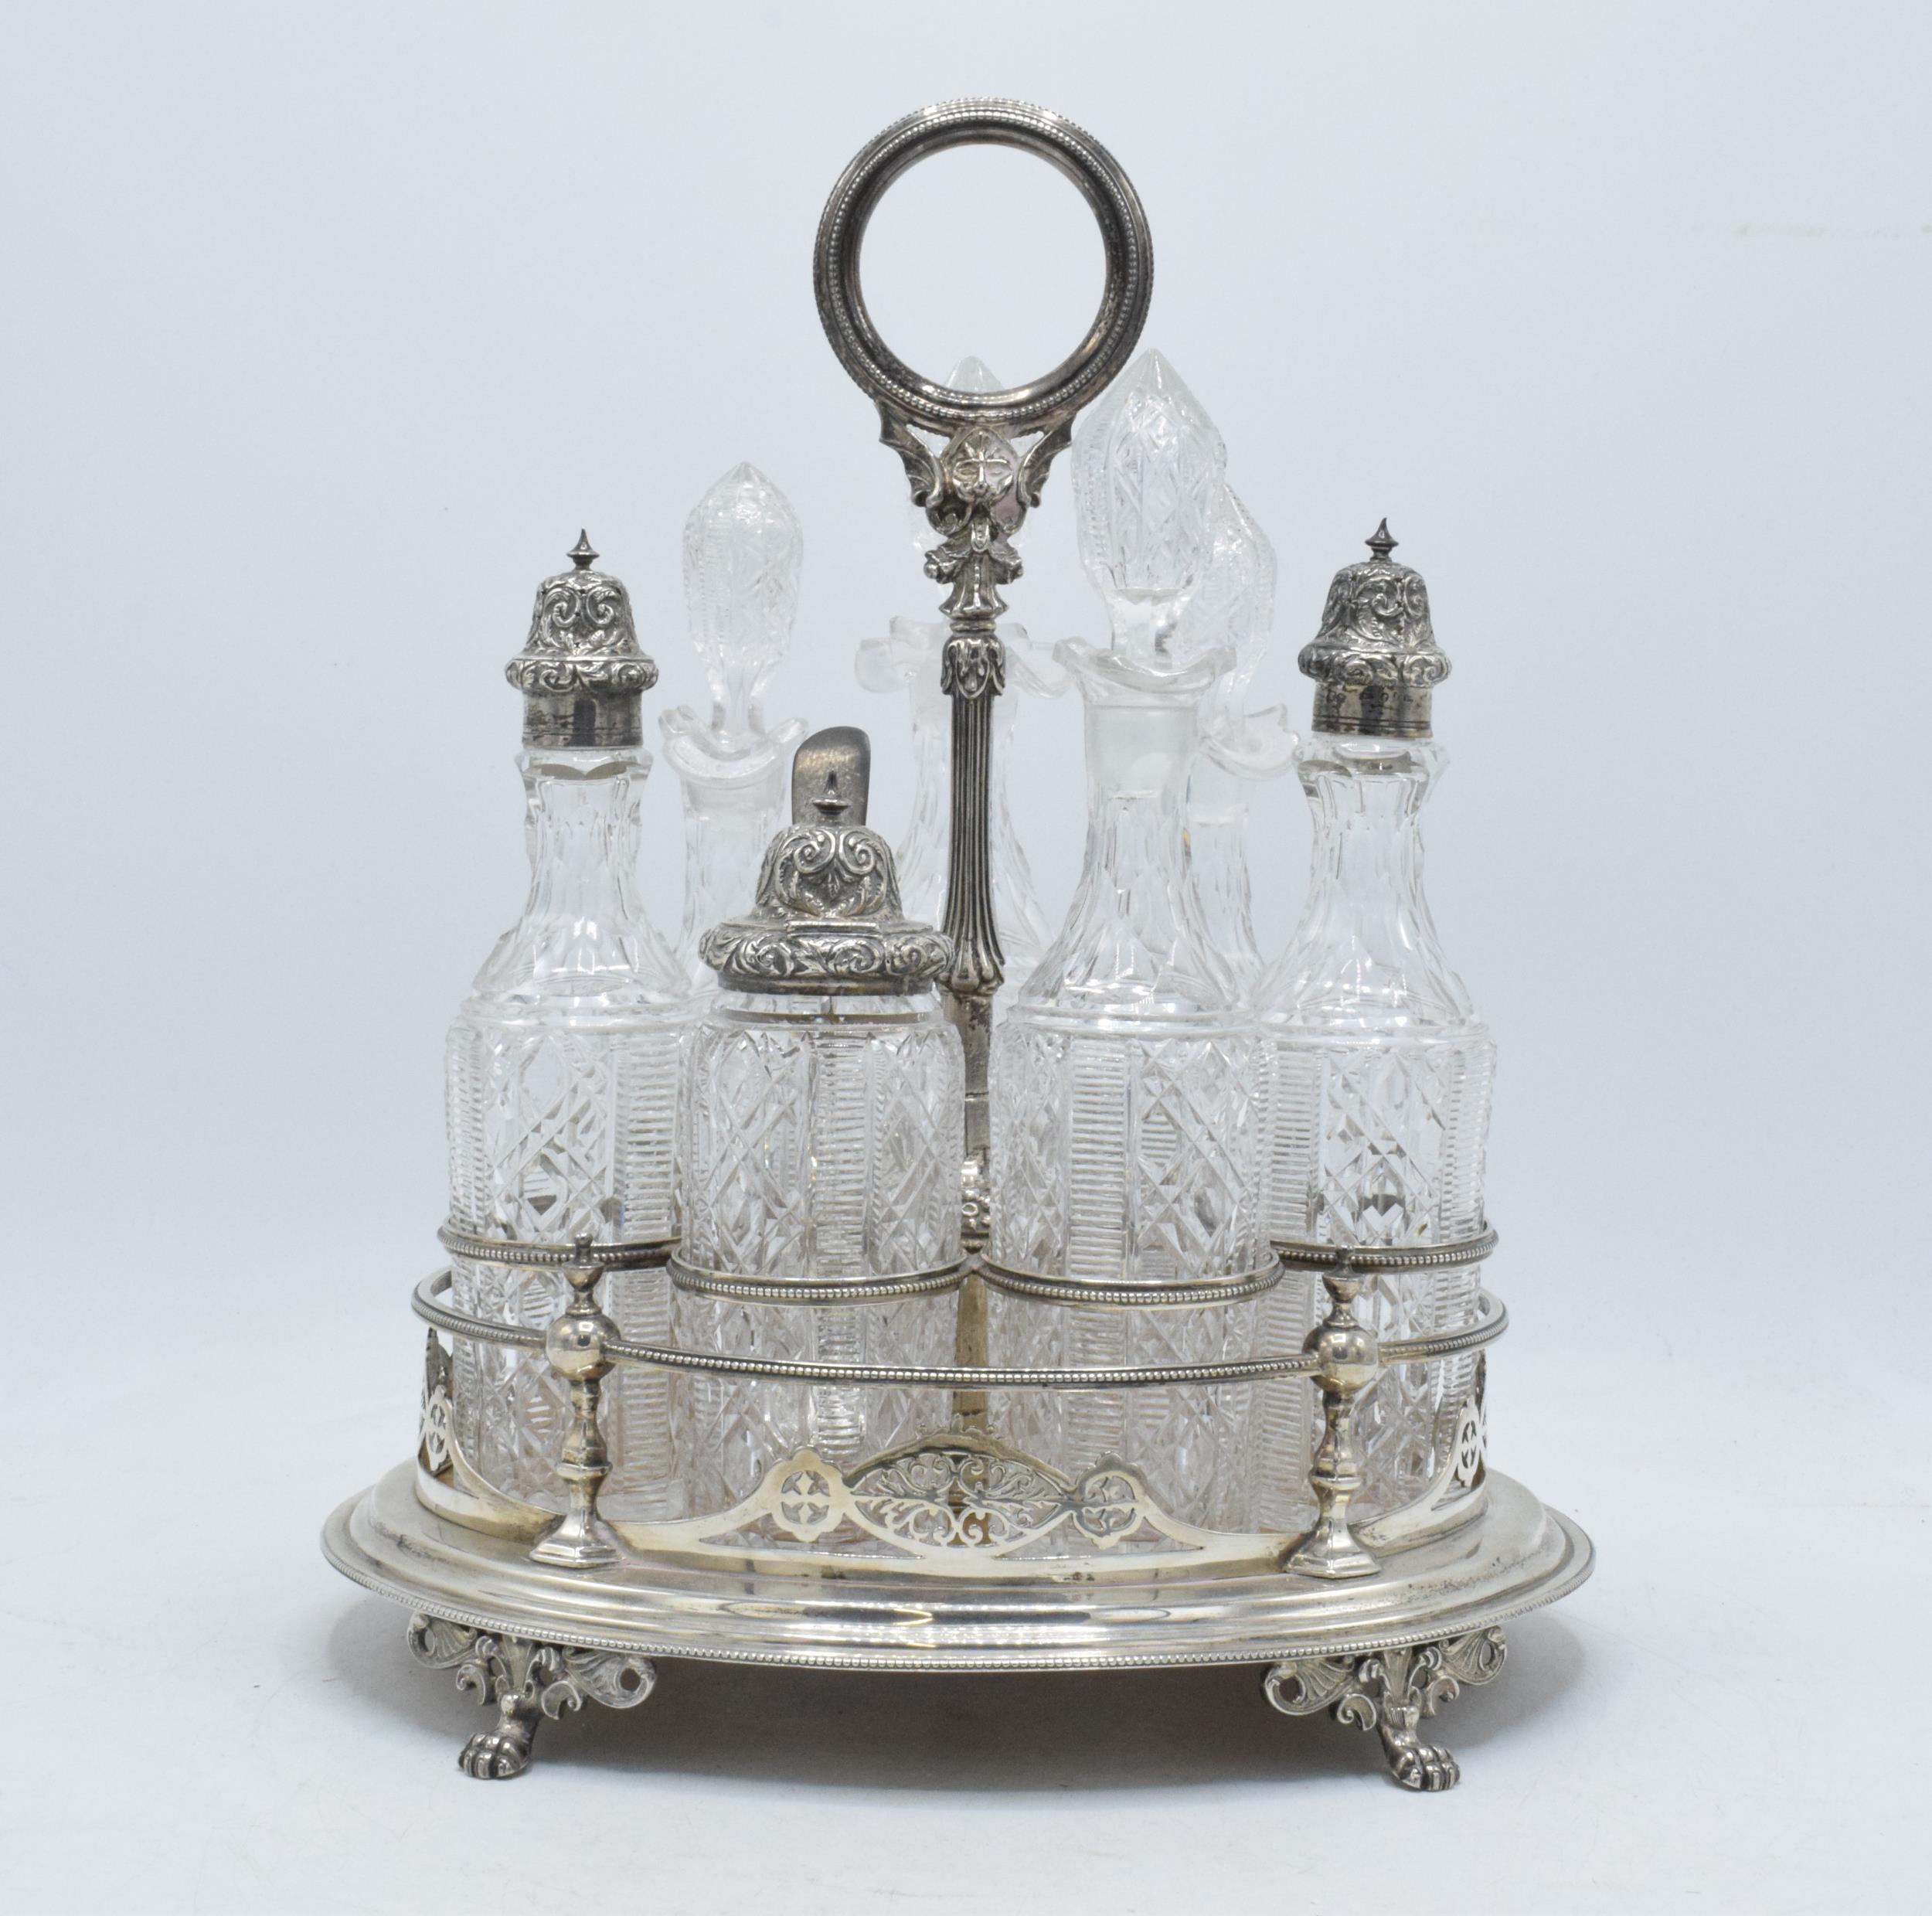 Hallmarked solid silver condiment tray with glass bottles and decanters, Sheffield 1879, makers mark - Image 4 of 12